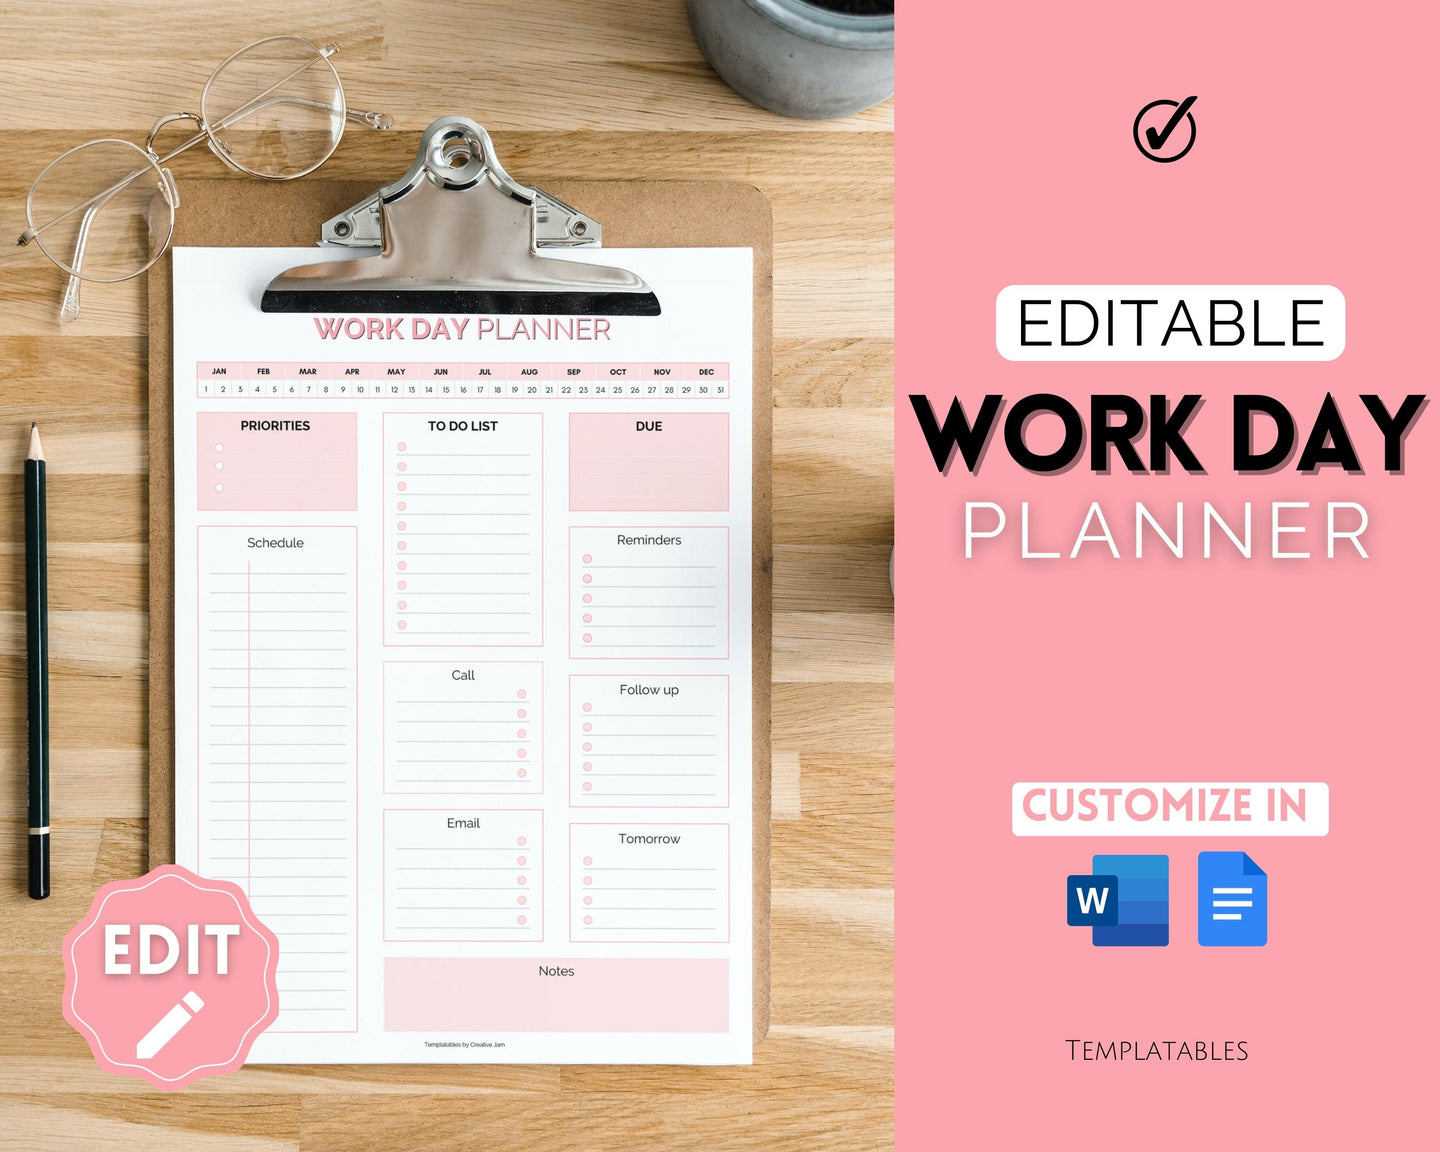 Work Planner & Work Day Organizer | Editable Daily Planner, Work From Home To Do List Printable & Digital Schedule | Pink